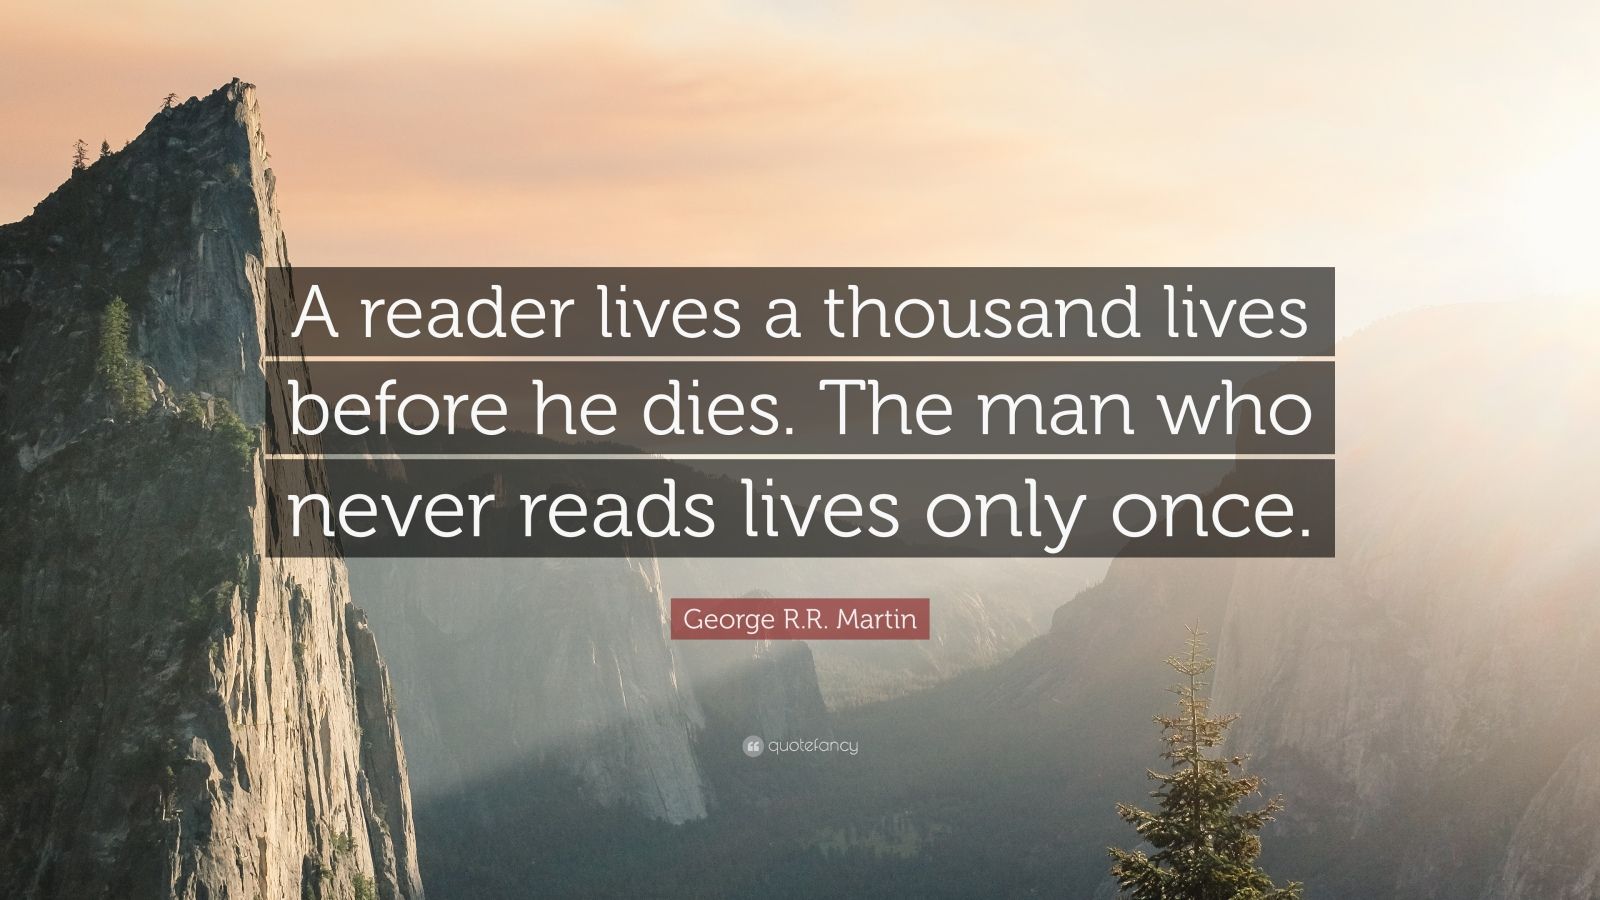 15431 George R R Martin Quote A reader lives a thousand lives before he